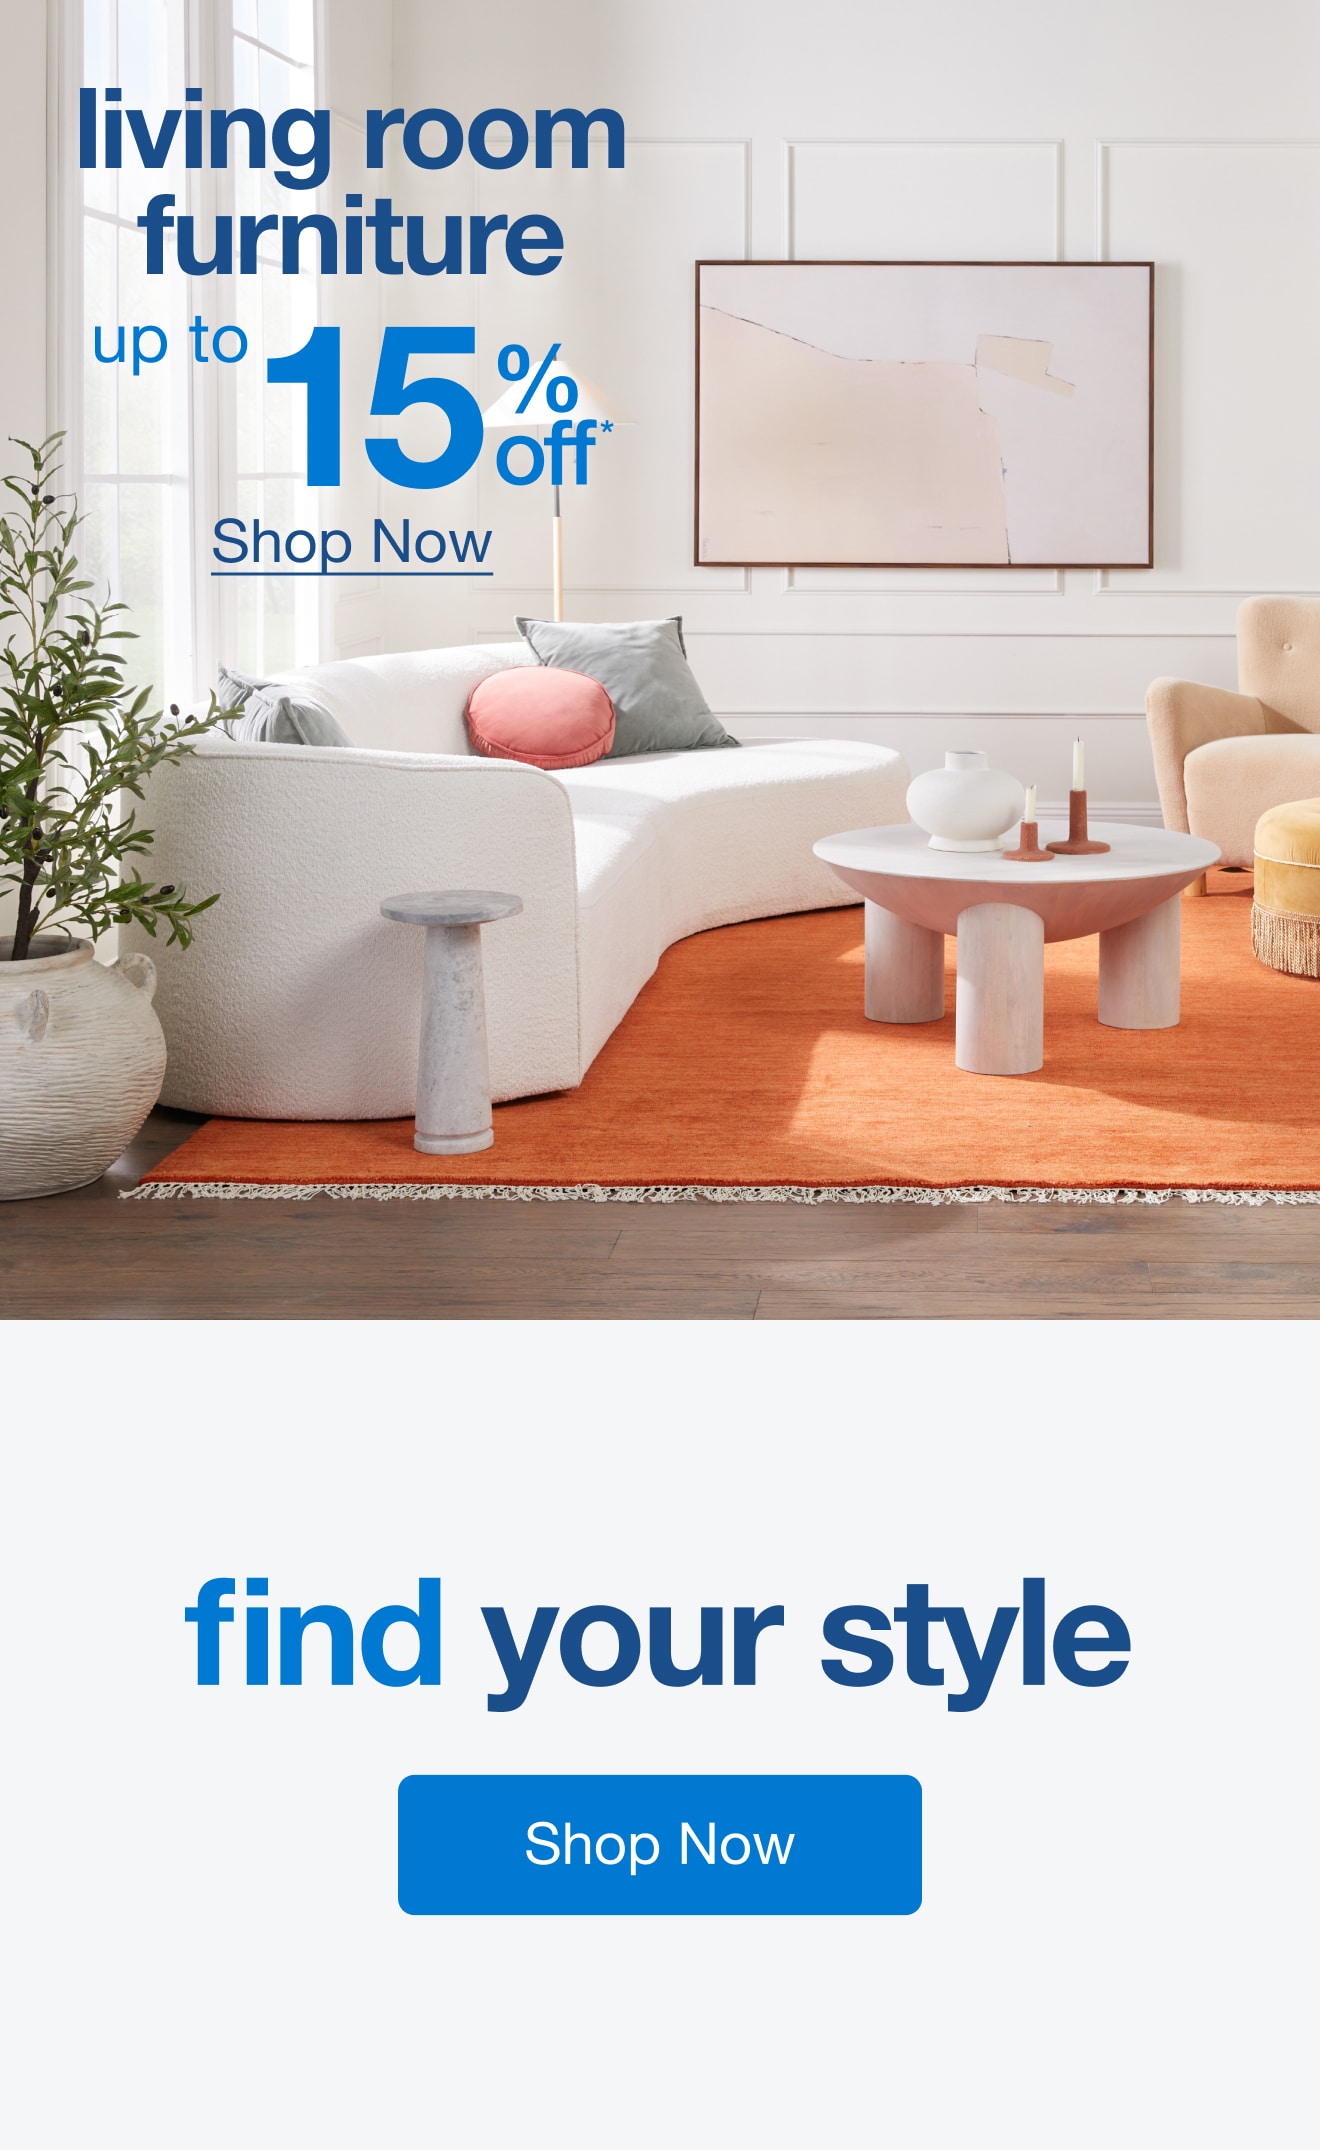 Up to 15% Off Living Room Furniture — Shop Now!